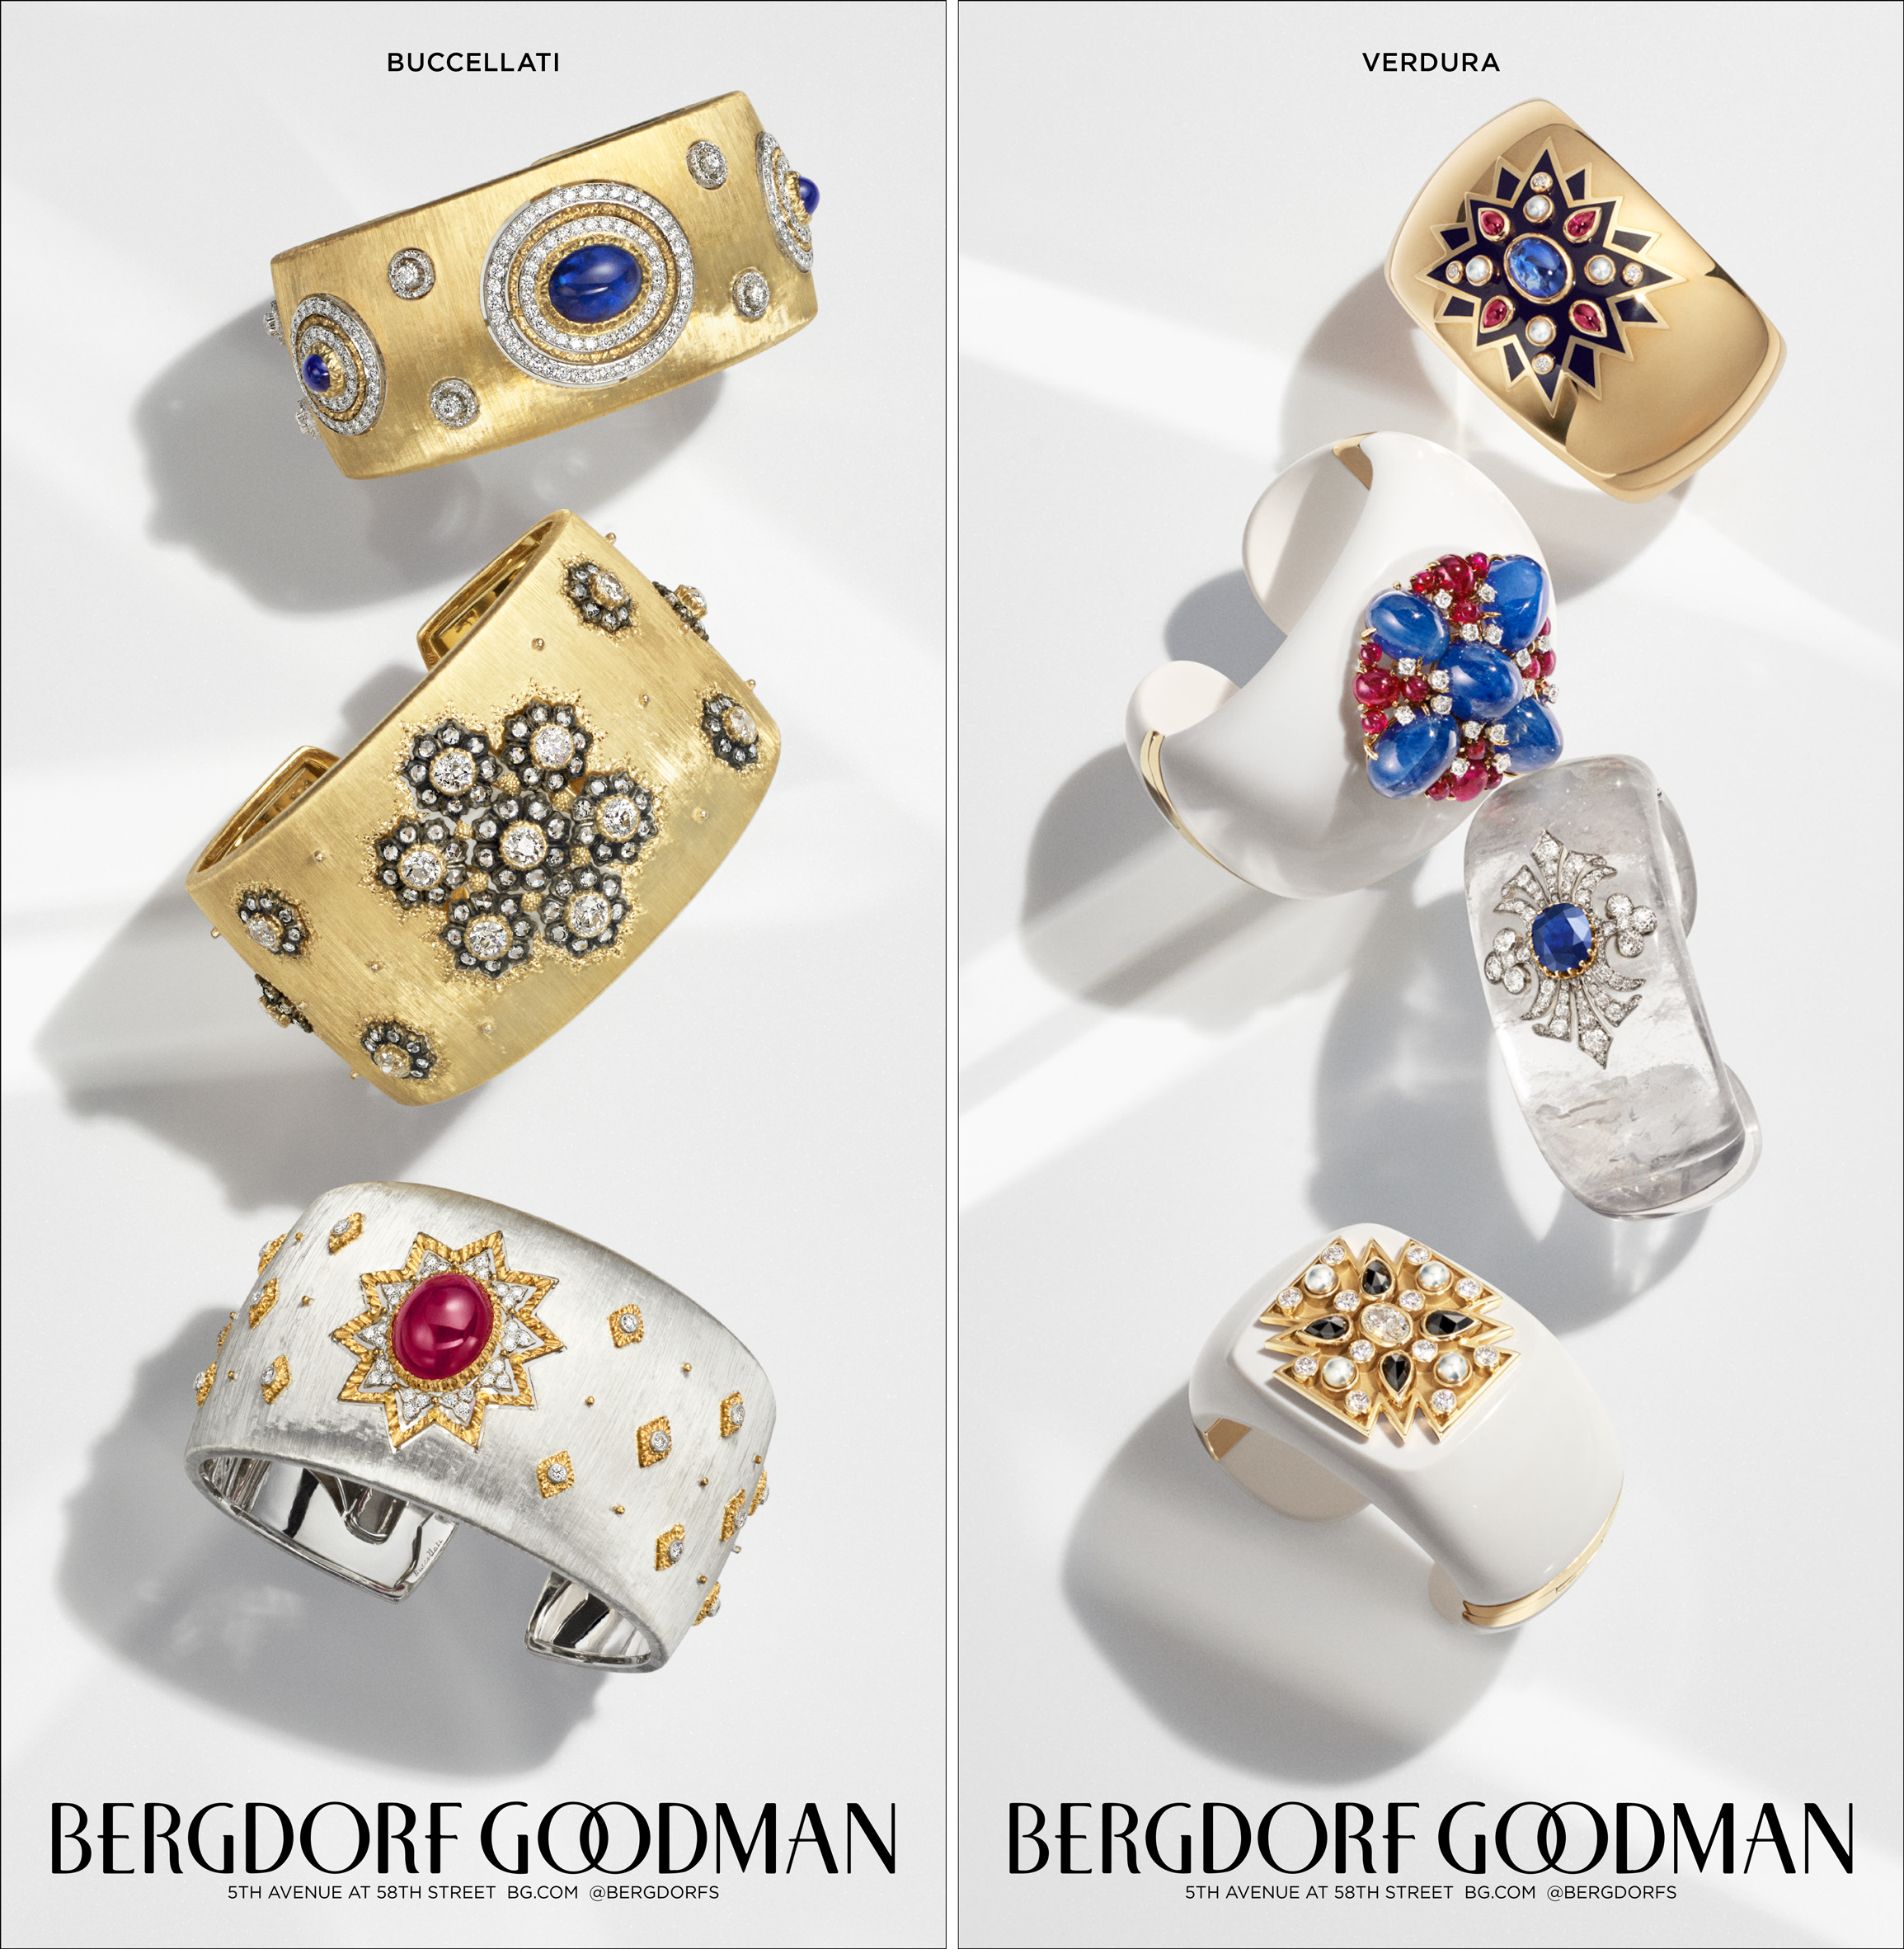  Spring 2019 fine jewelry campaign advertisements in  The New York Times . 7.65 x 15.75”. Photo shoot Creative Direction and Design. Photographer Stephen Lewis, Prop Stylist Peter Tran. 